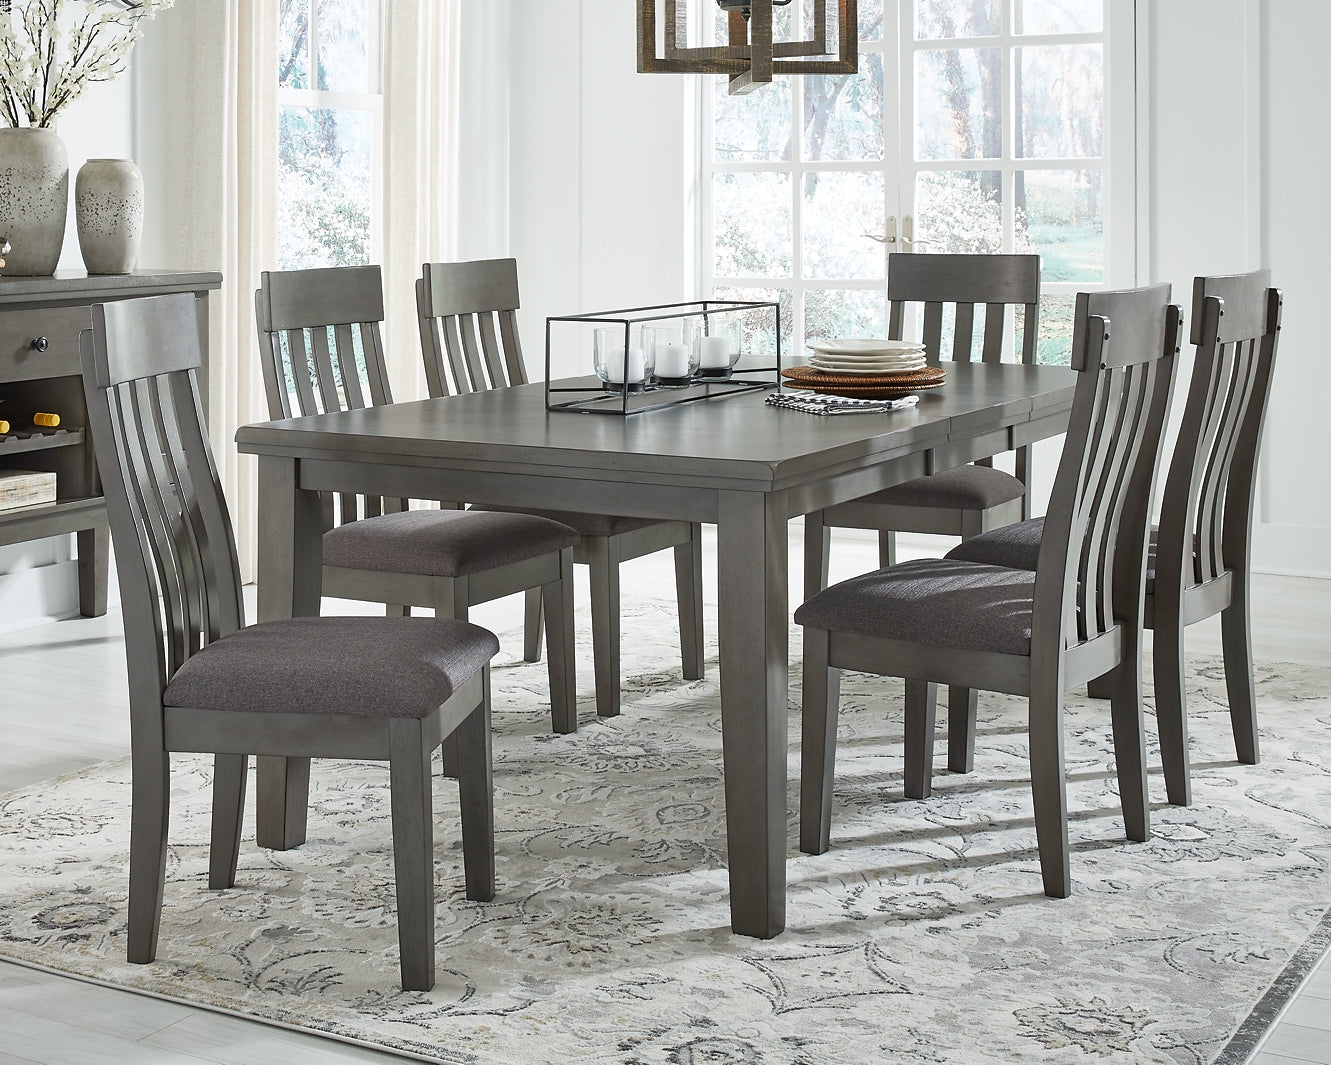 Hallanden Dining Table and 6 Chairs Rent Wise Rent To Own Jacksonville, Florida